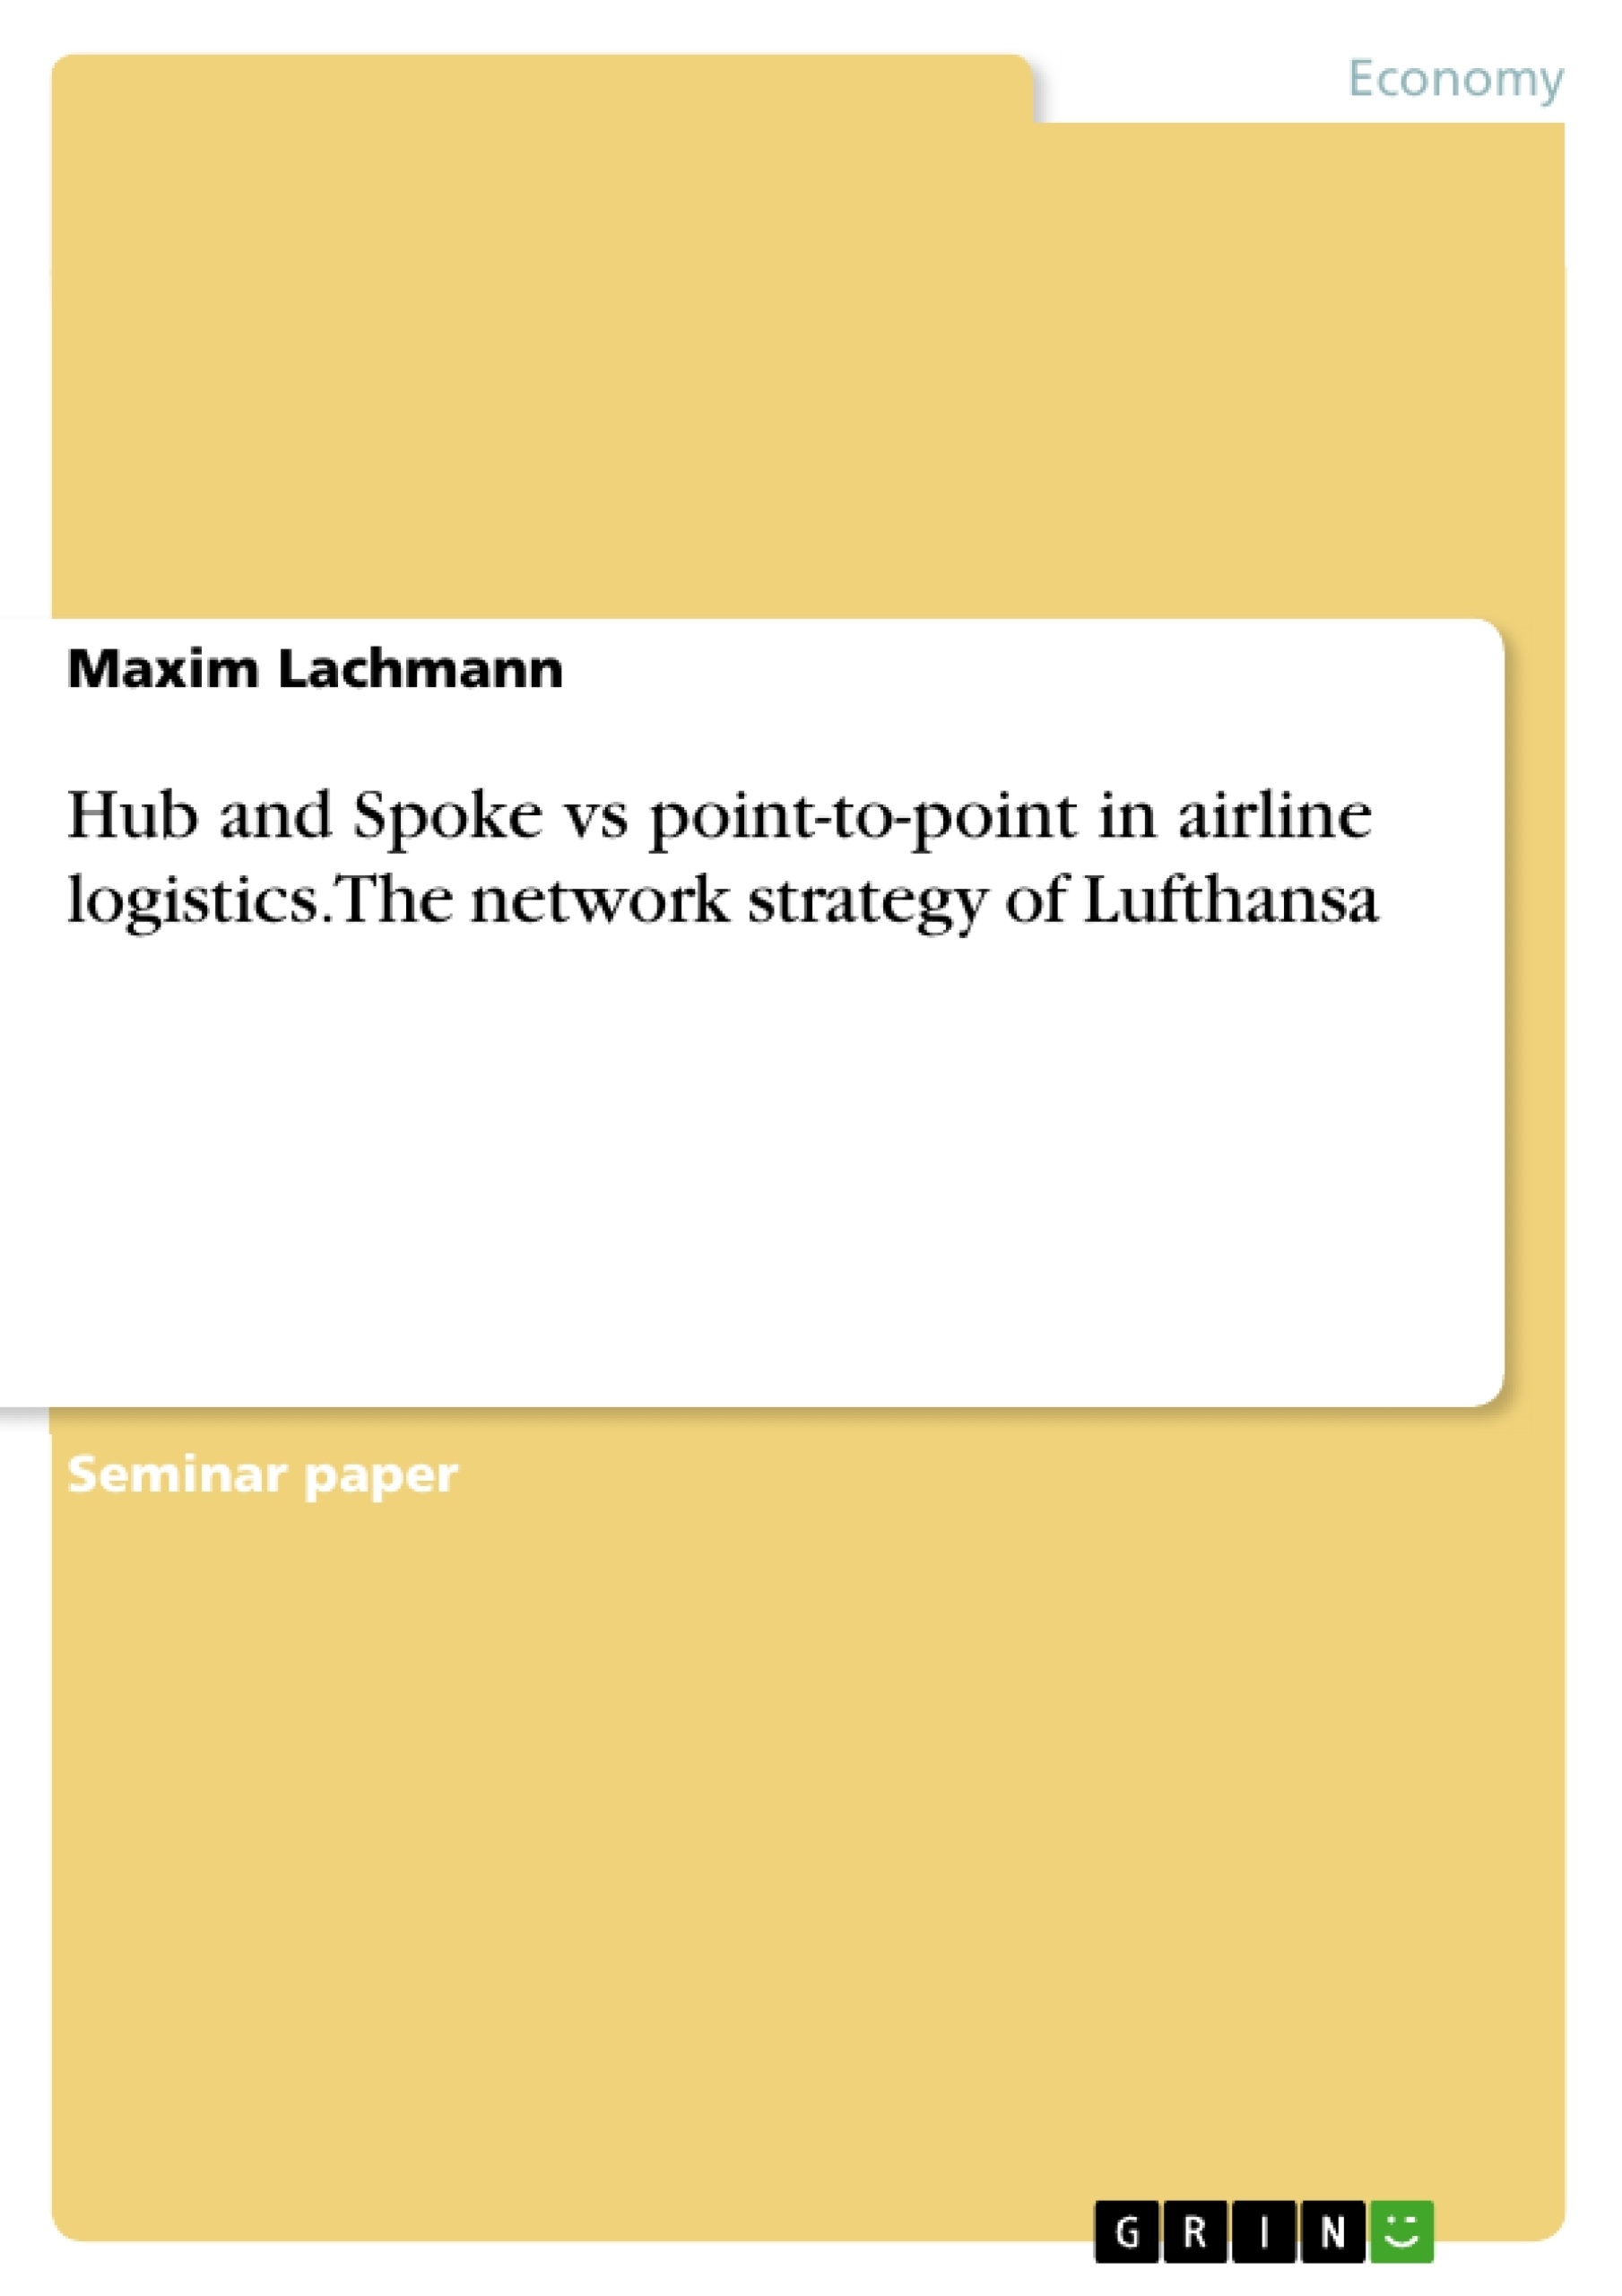 Titre: Hub and Spoke vs point-to-point in airline logistics. The network strategy of Lufthansa